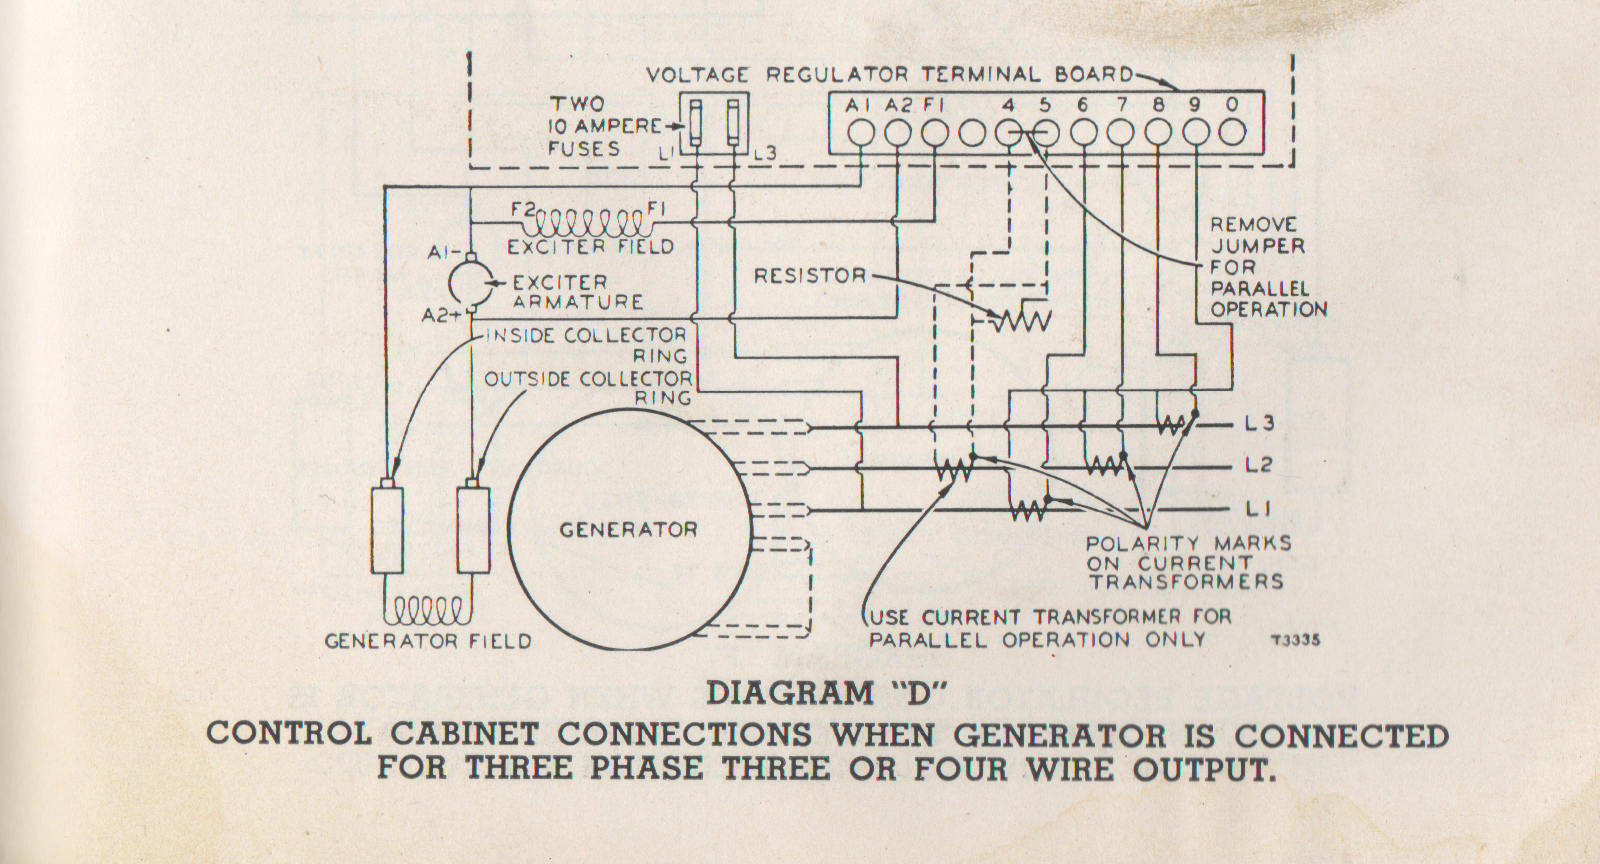 Circuit diagram. Diagram D. Control cabinet connections when generator is connected for three phase or four phase wire output.